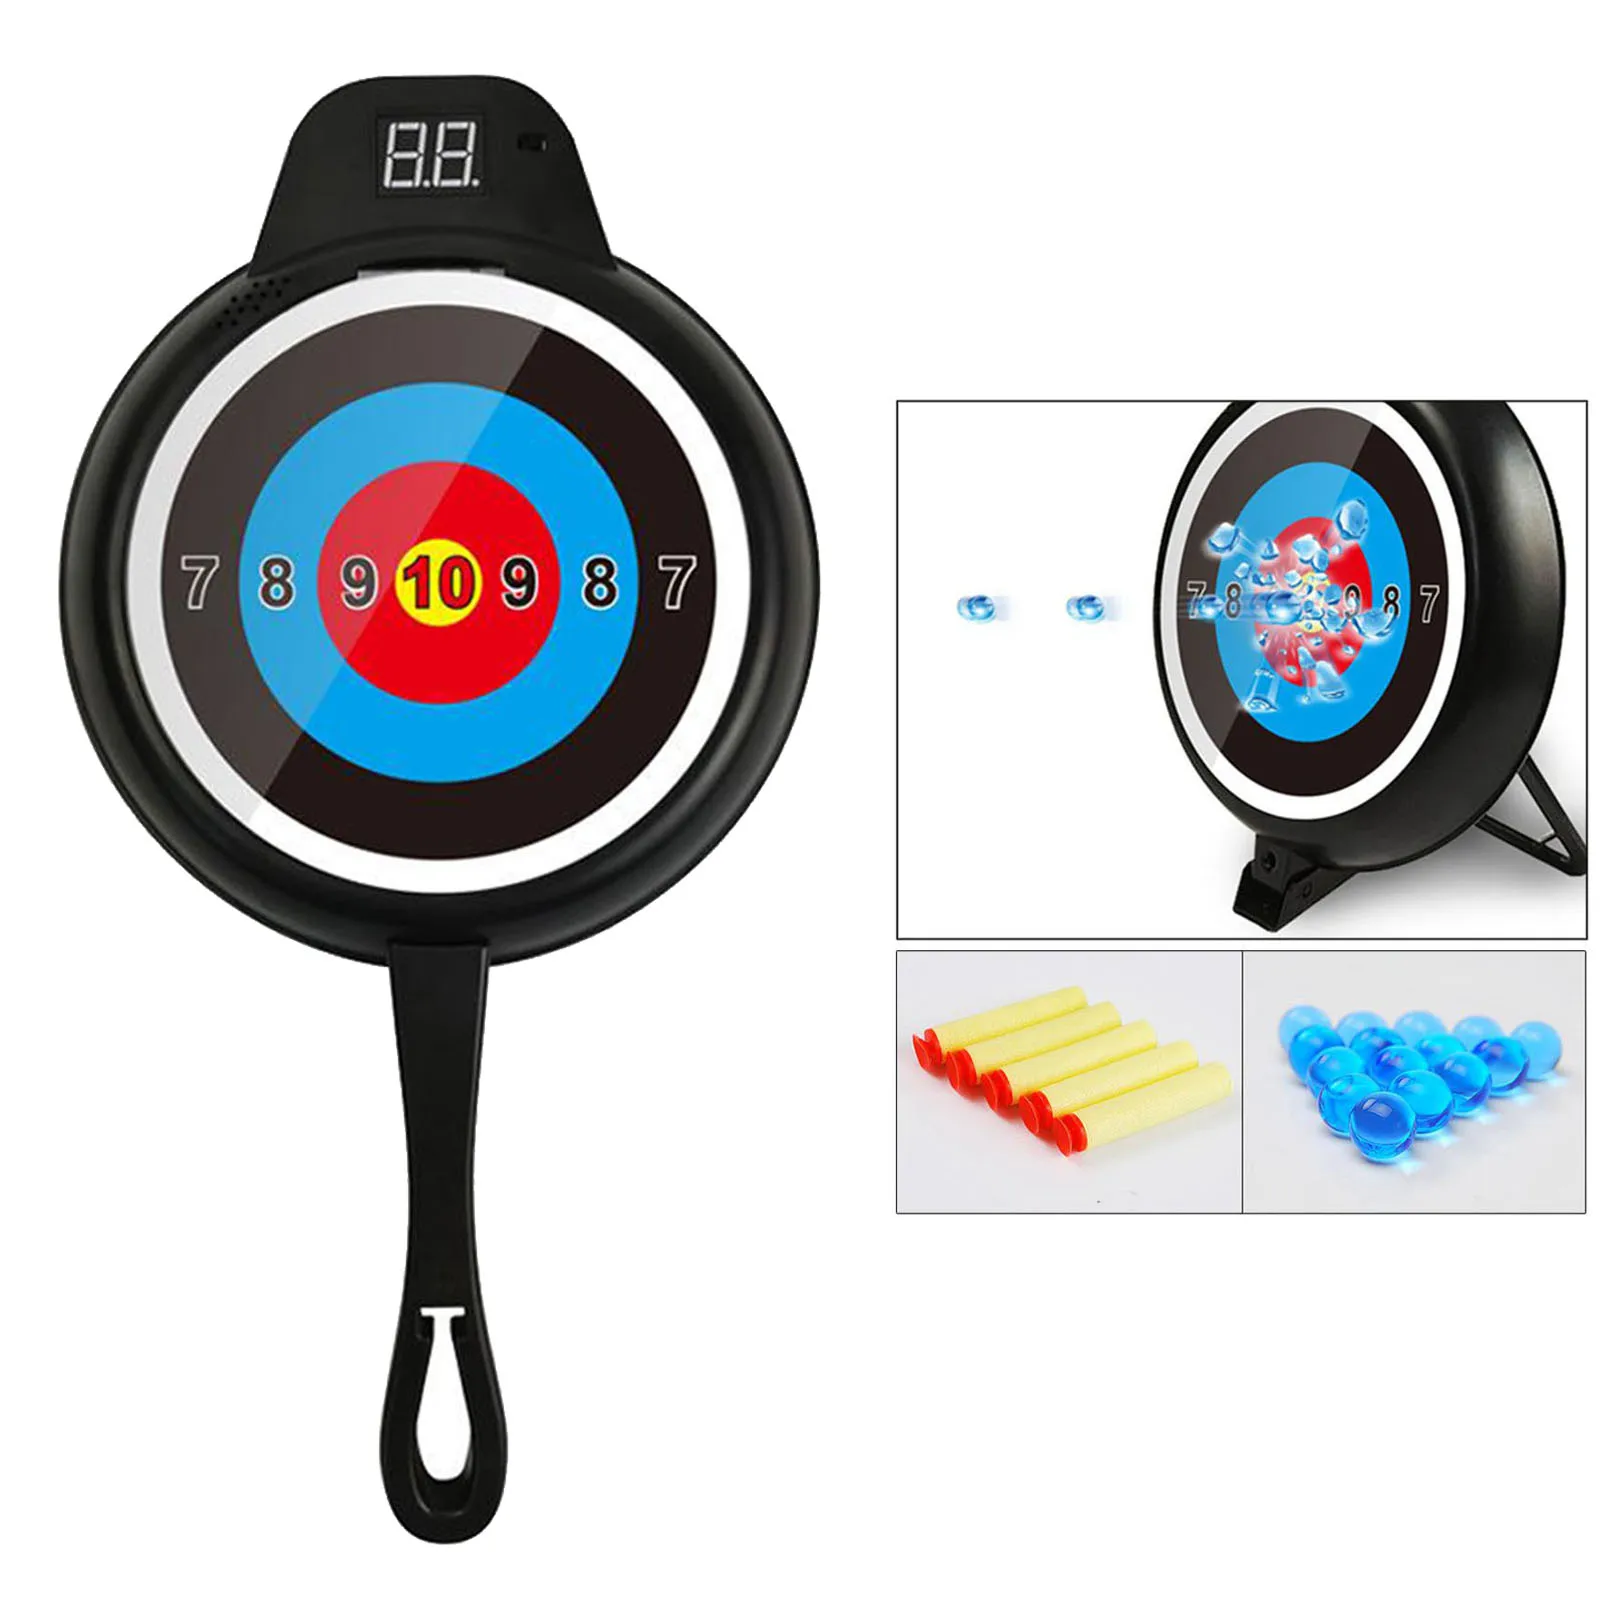 Digital Electric Target Mat Scoring Targets Shooting Practice Accessory Training Toy